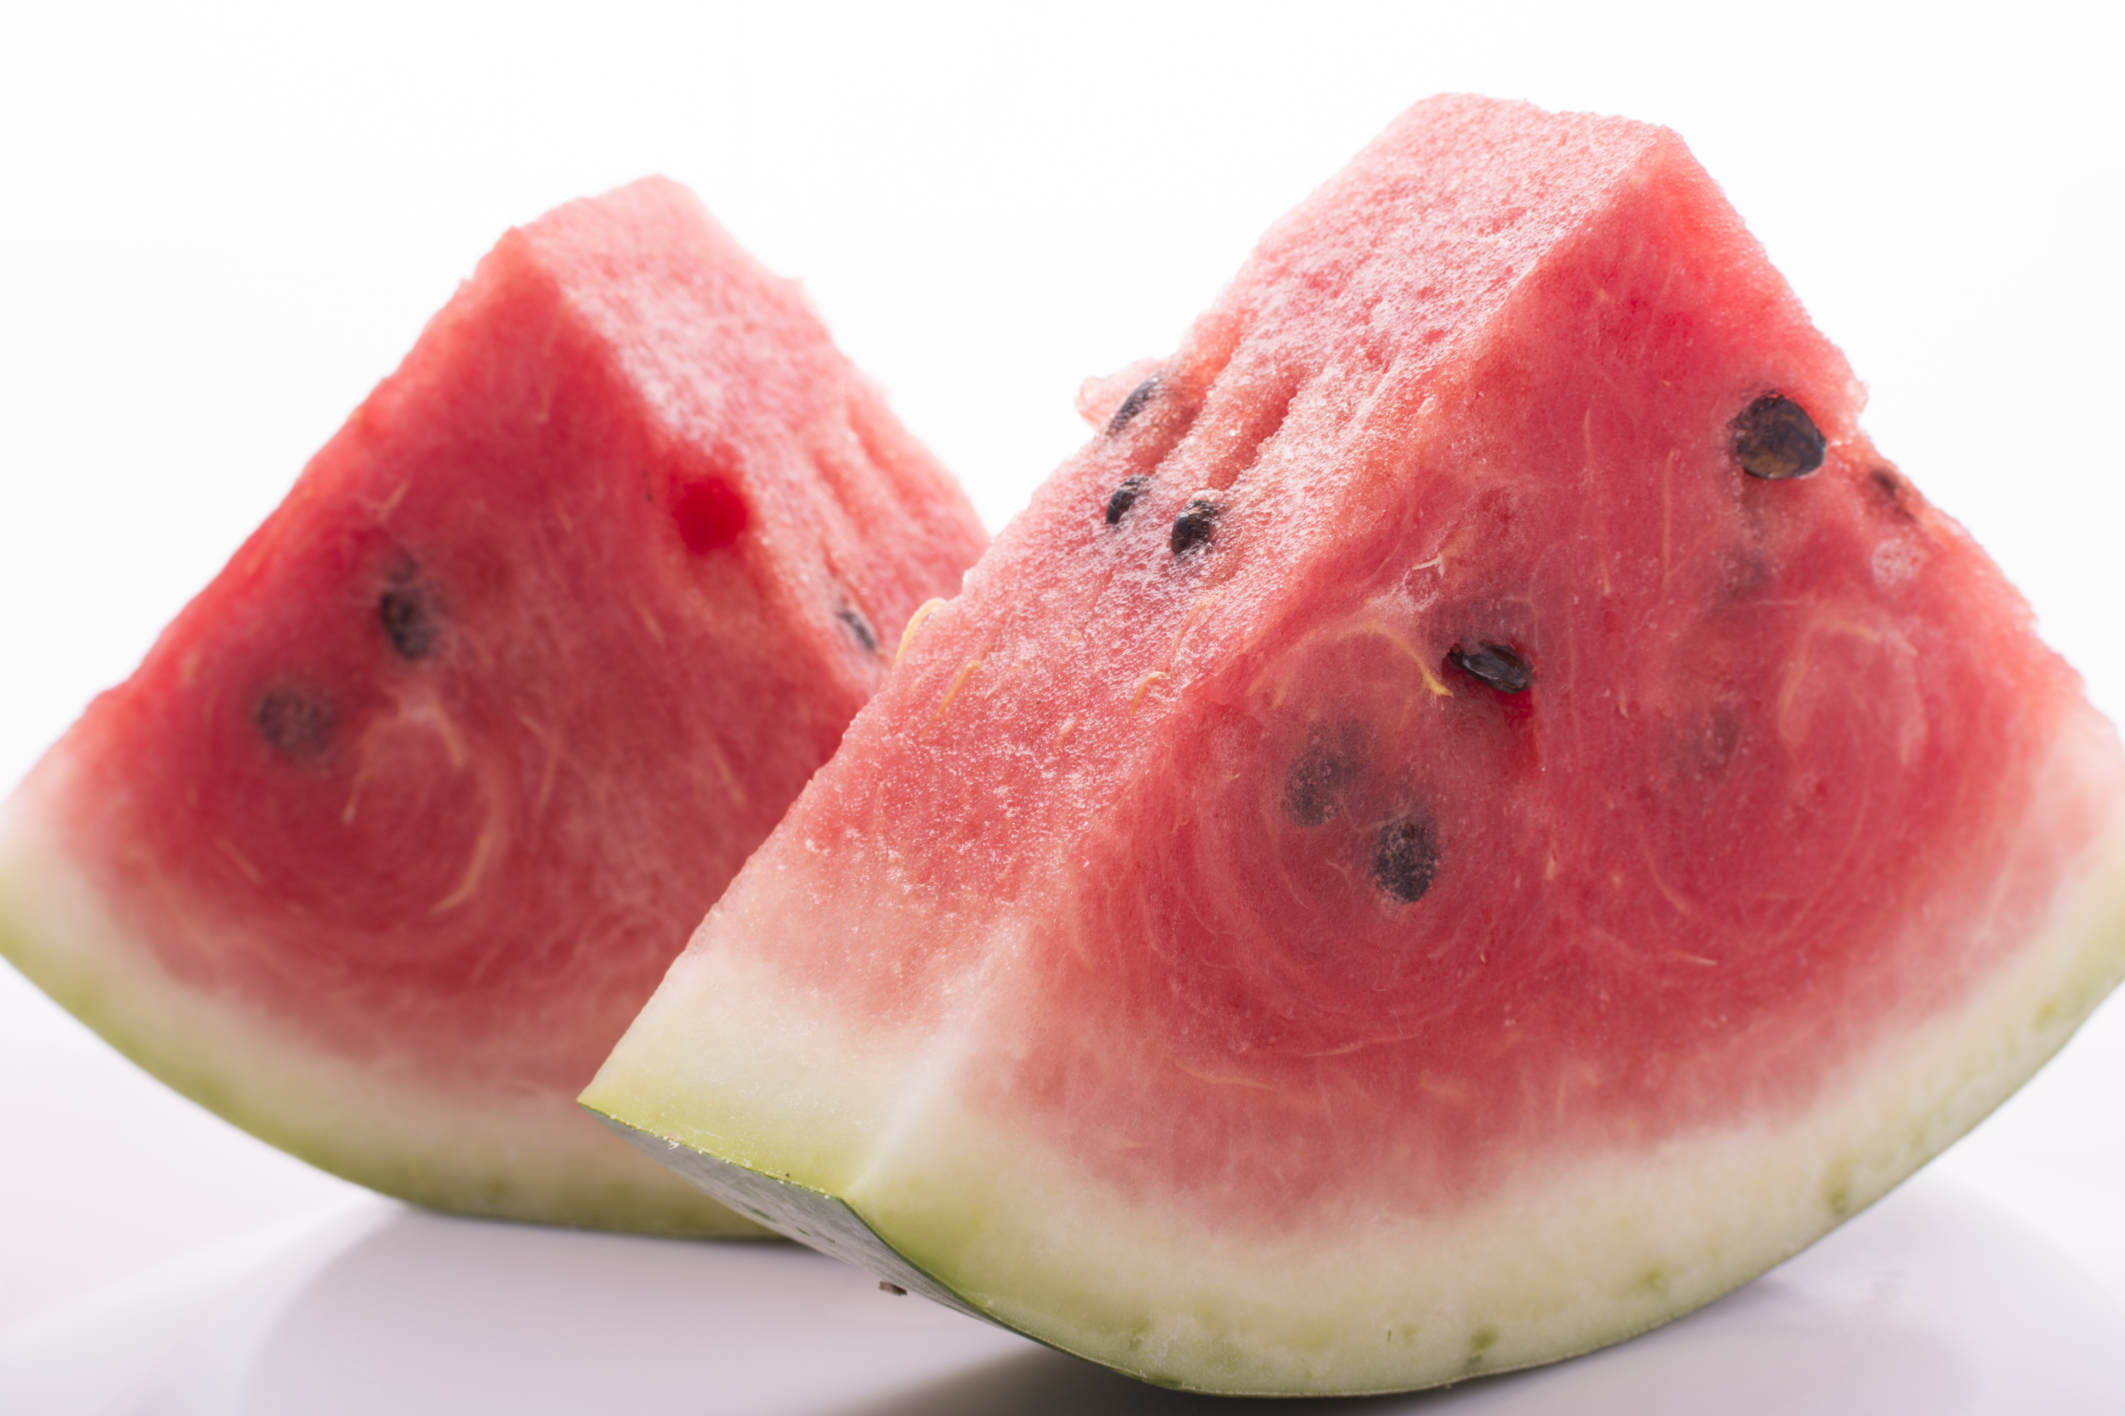 Is Watermelon Good for Losing Weight? | LIVESTRONG.COM